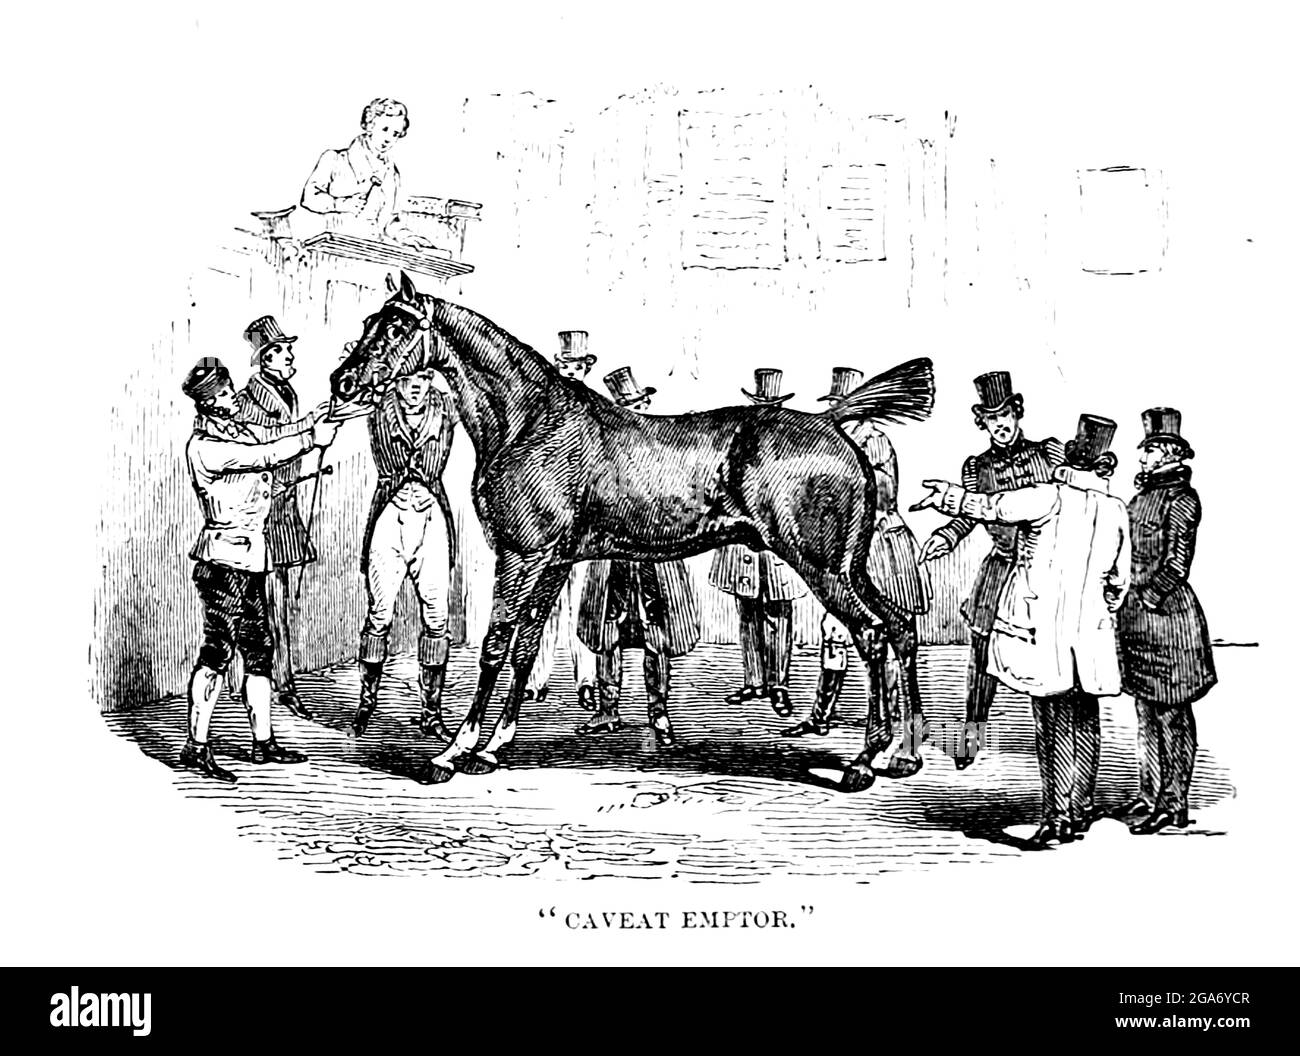 Caveat Emptor horse auction From the book ' London and its environs : a practical guide to the metropolis and its vicinity, illustrated by maps, plans and views ' by Adam and Charles Black Published in Edinburgh by A. & C. Black 1862 Stock Photo